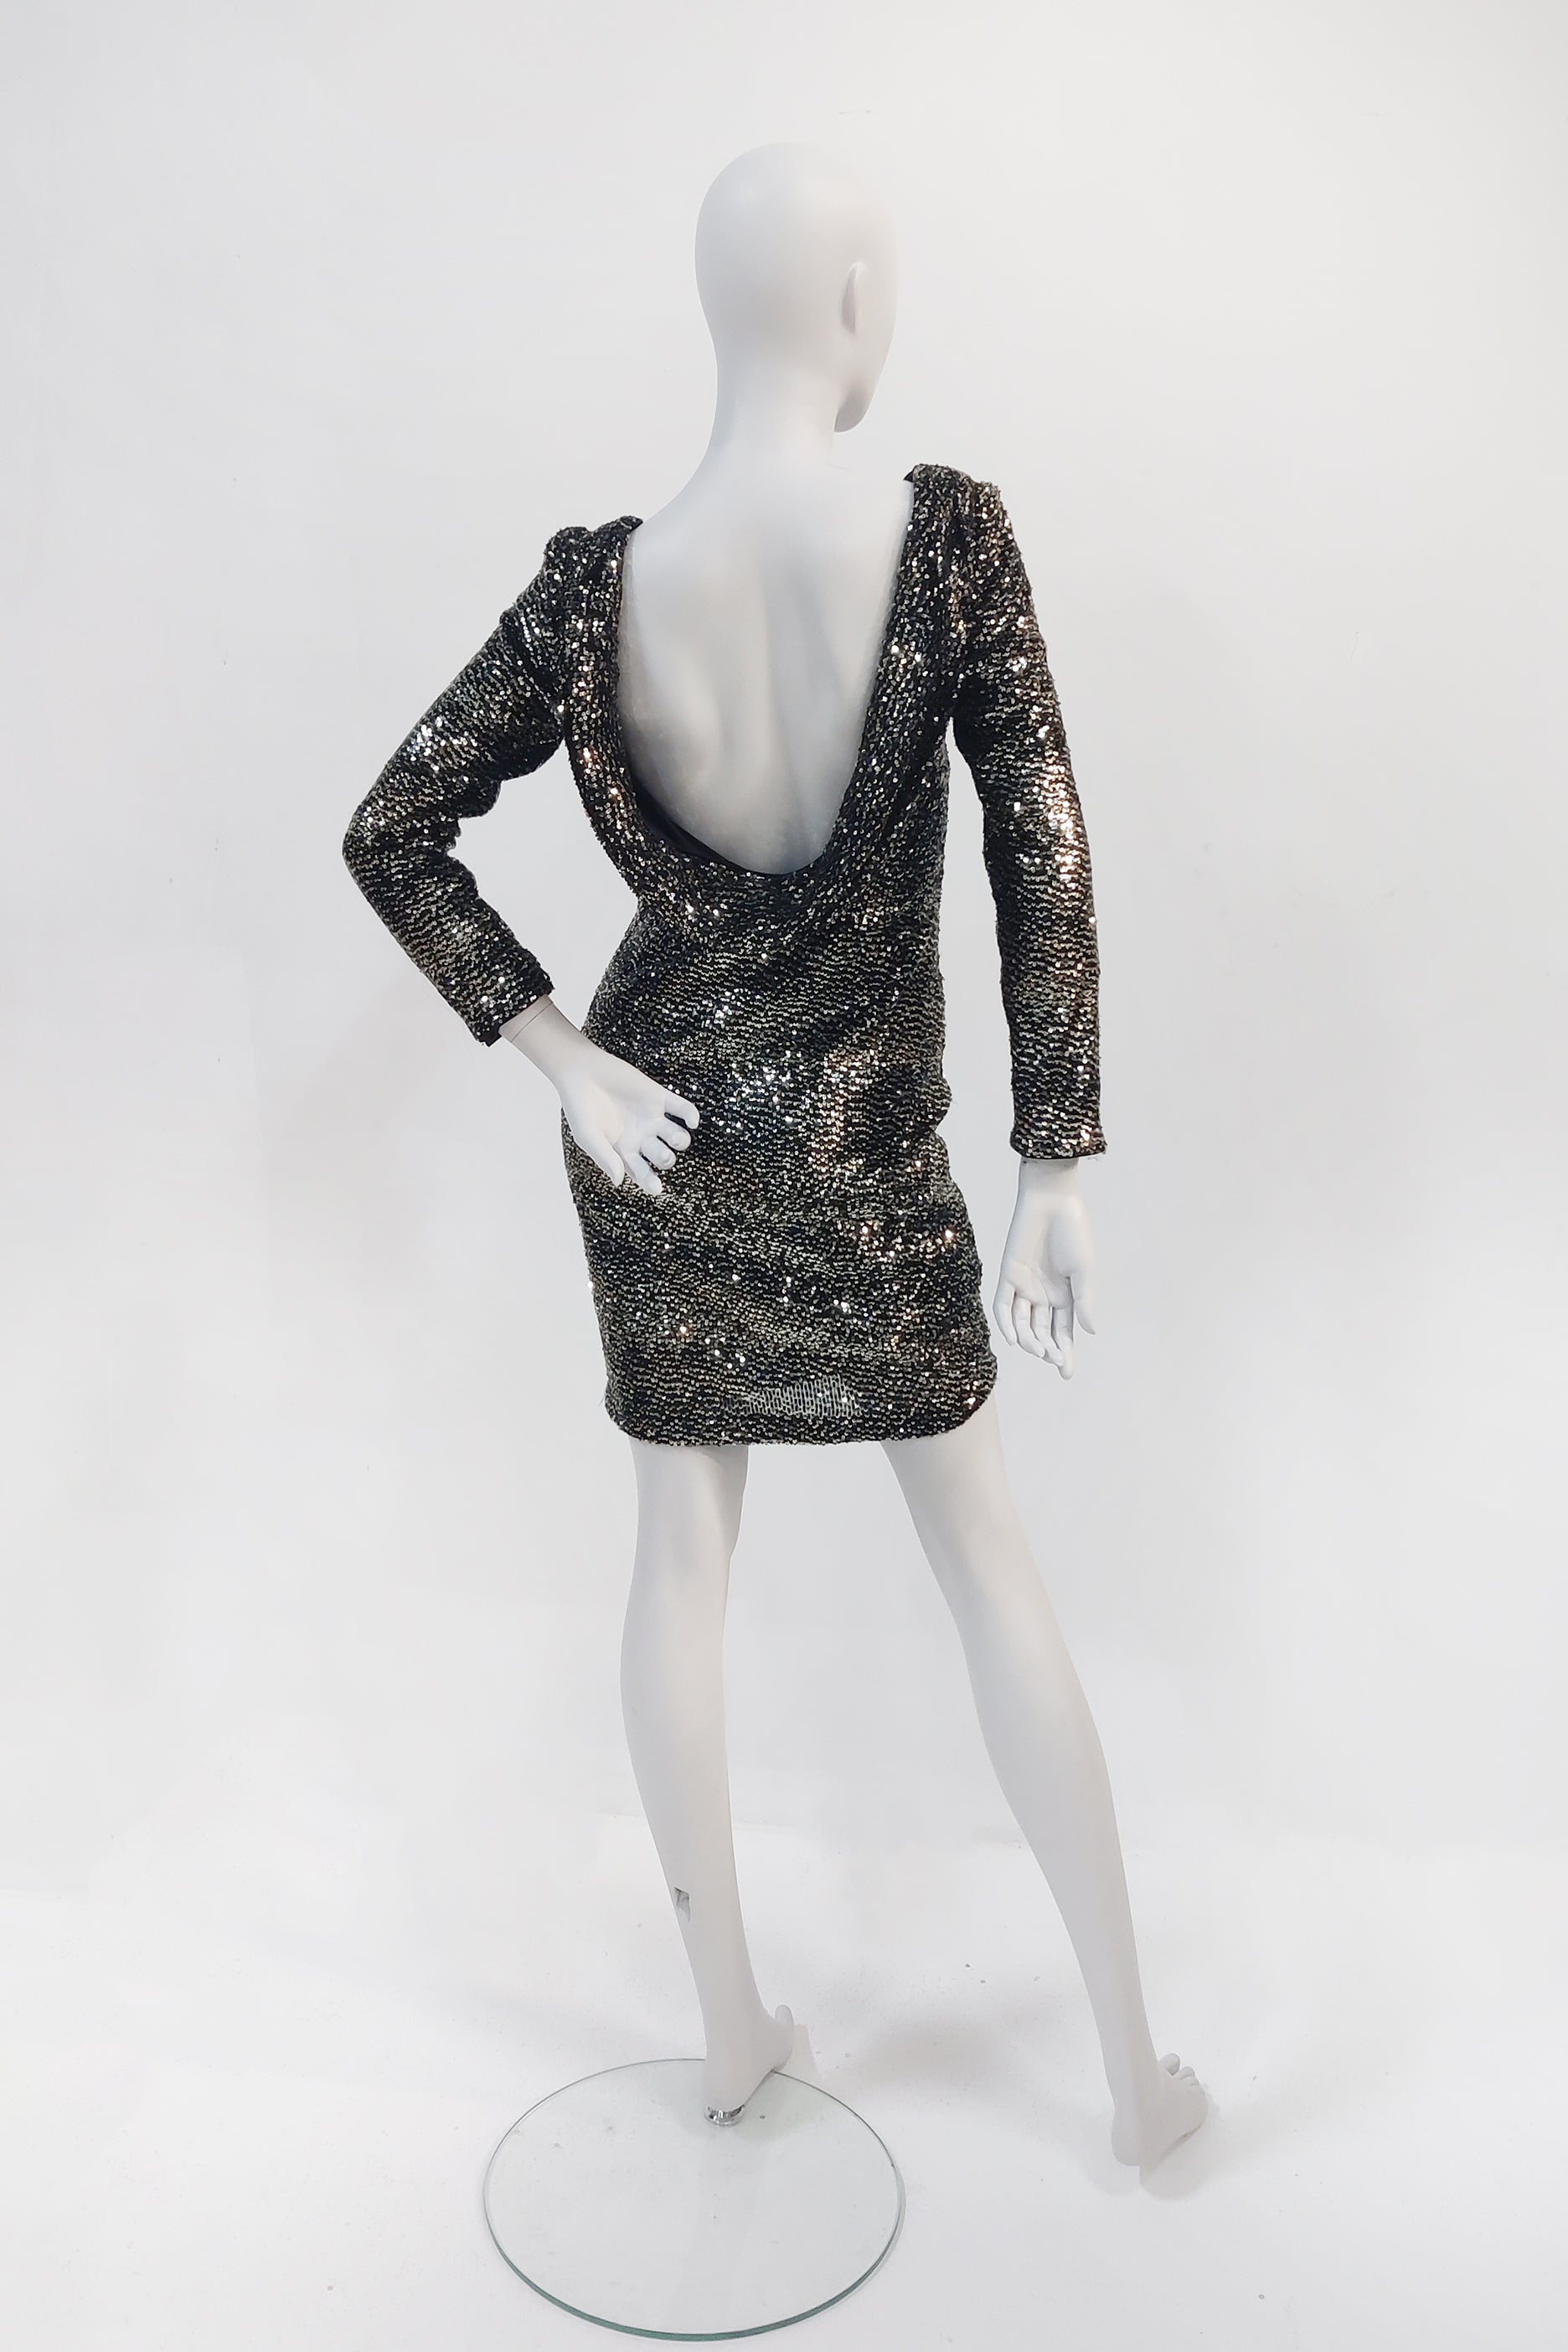 Black/Silver Sequin Party Dress with Open Back (Medium)